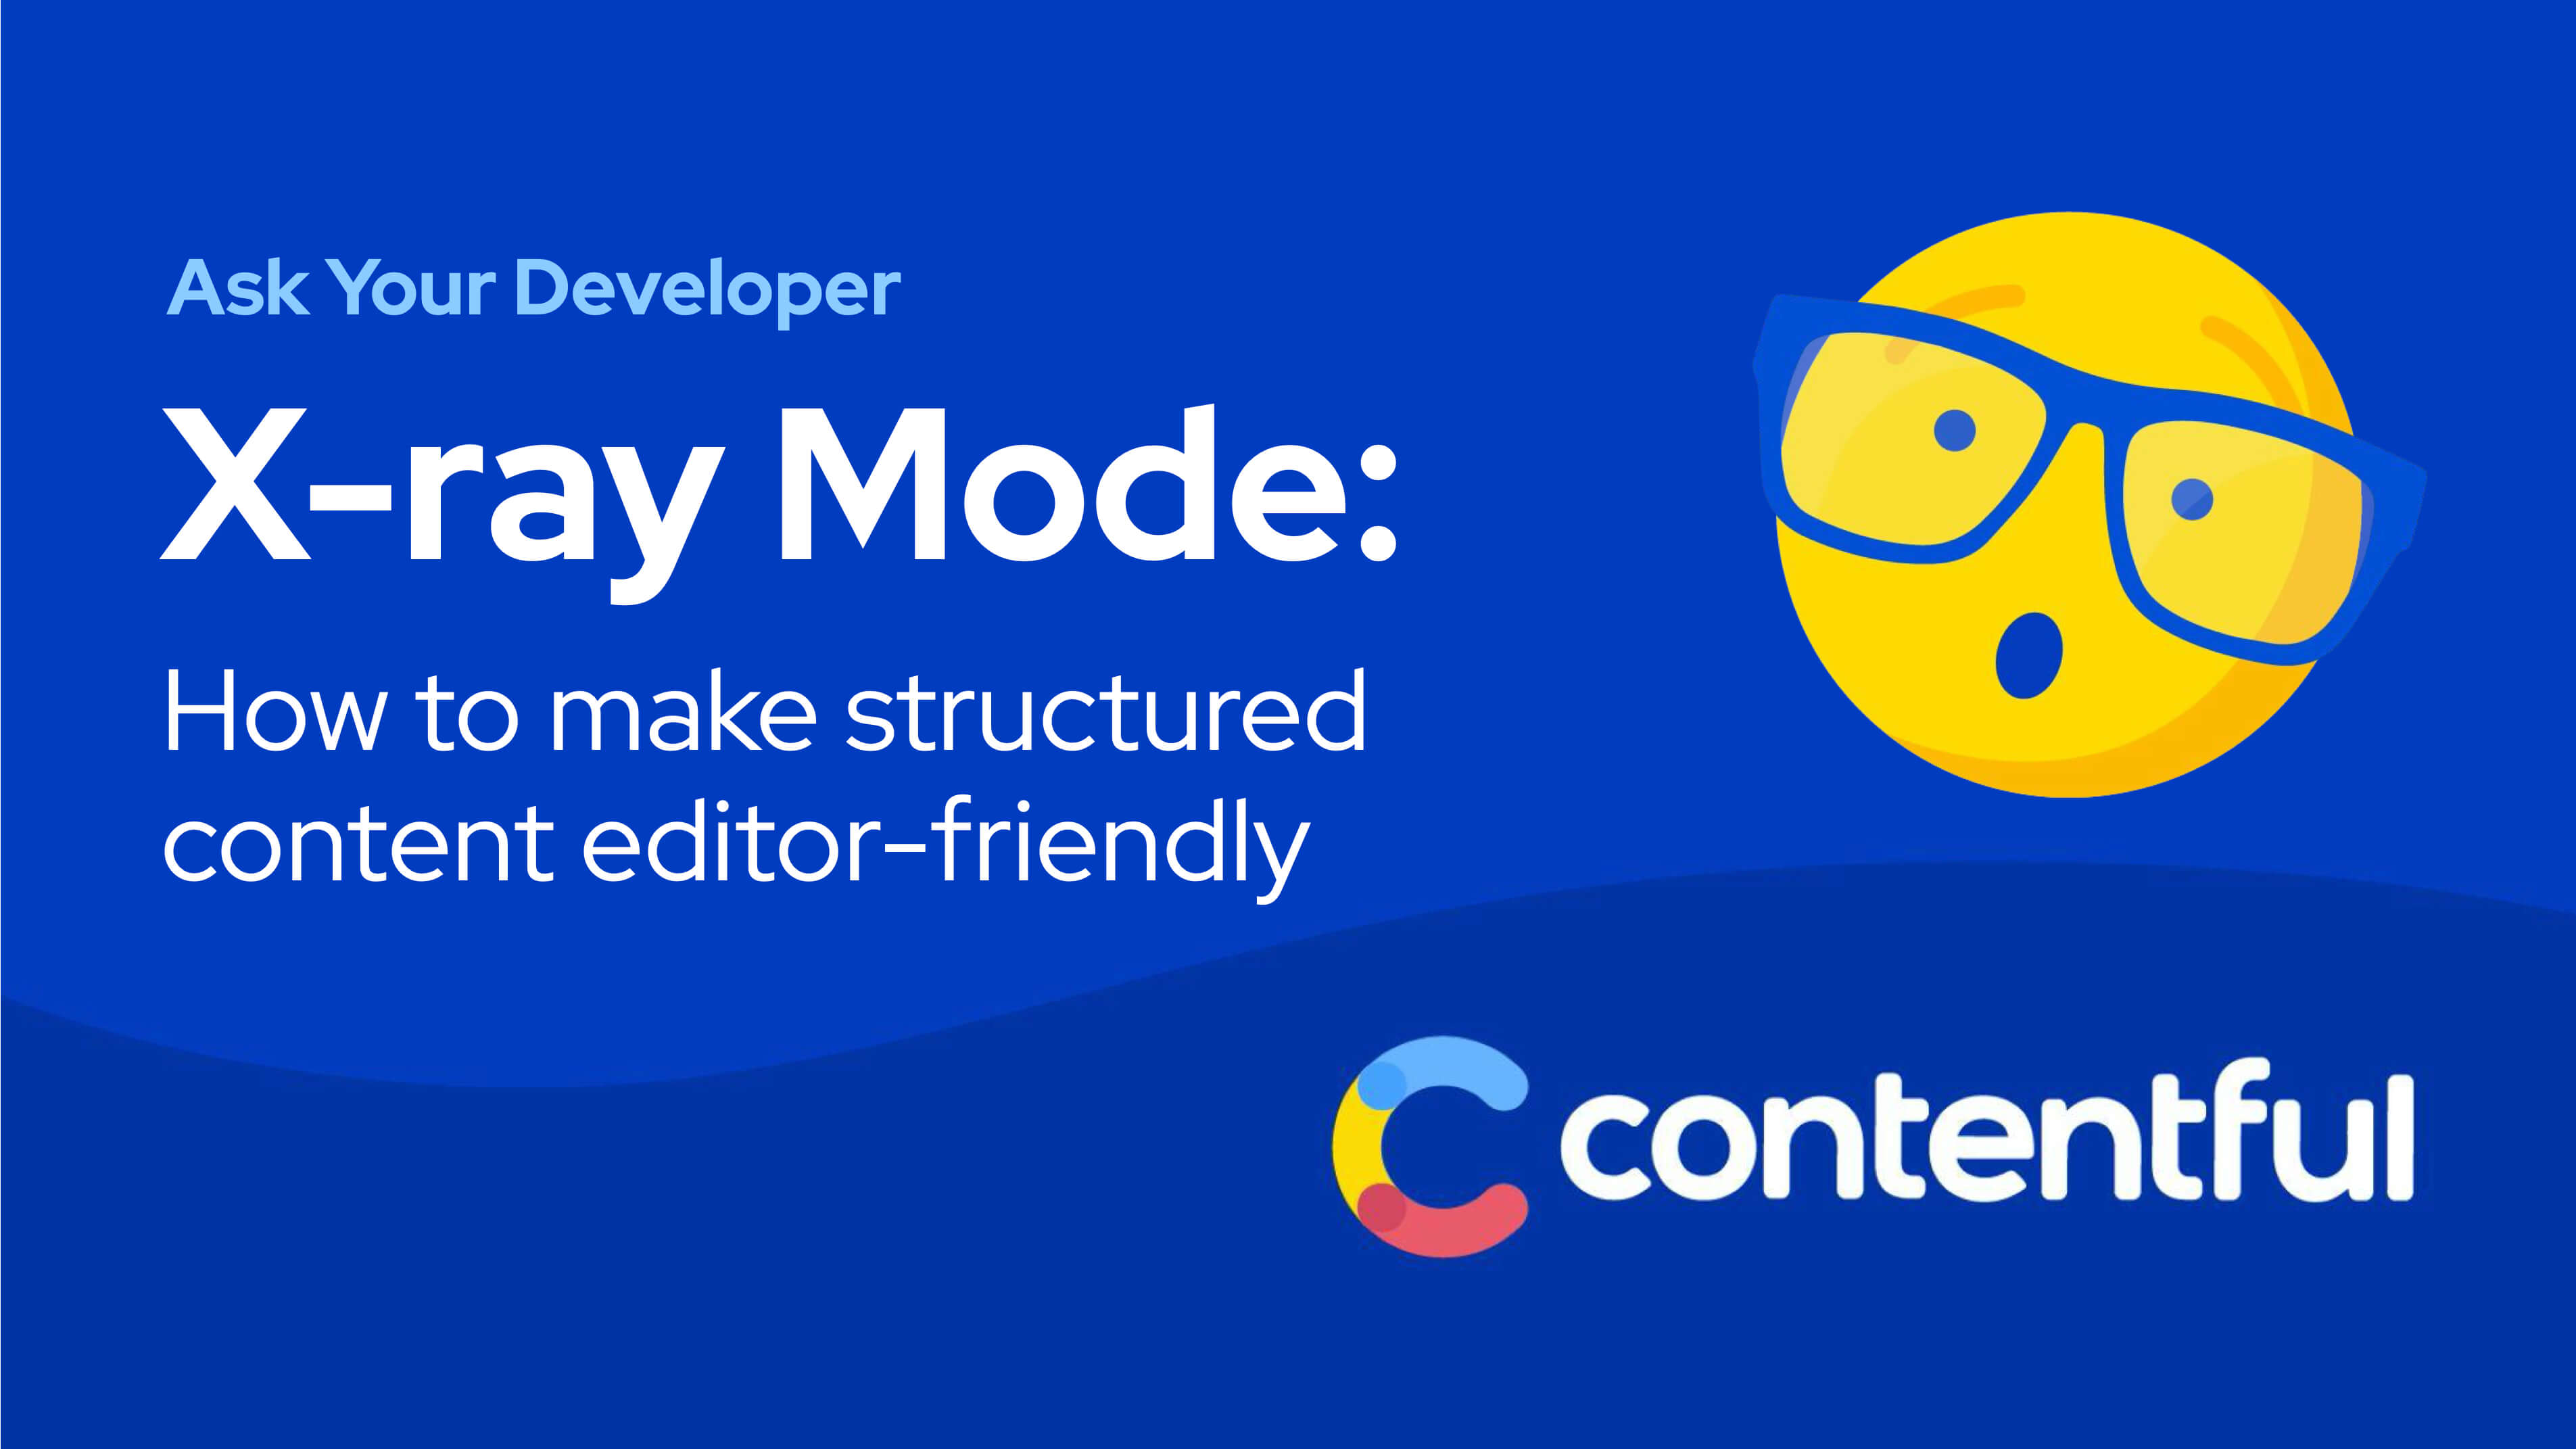 X-ray Mode: How to make structured content editor-friendly